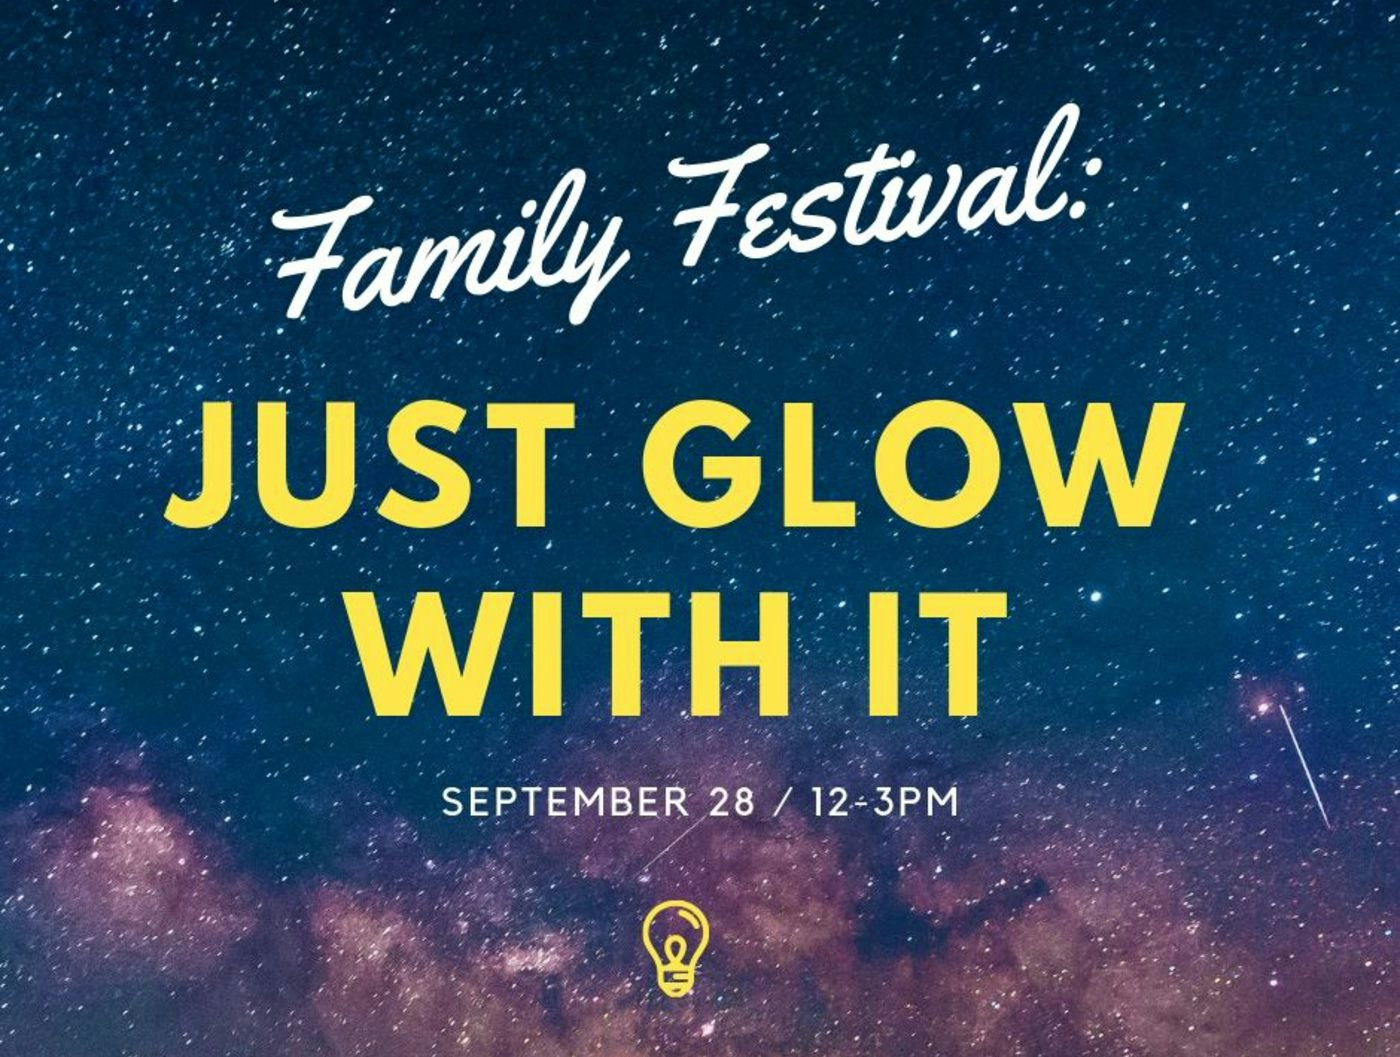 Family Festival: Just Glow With It!